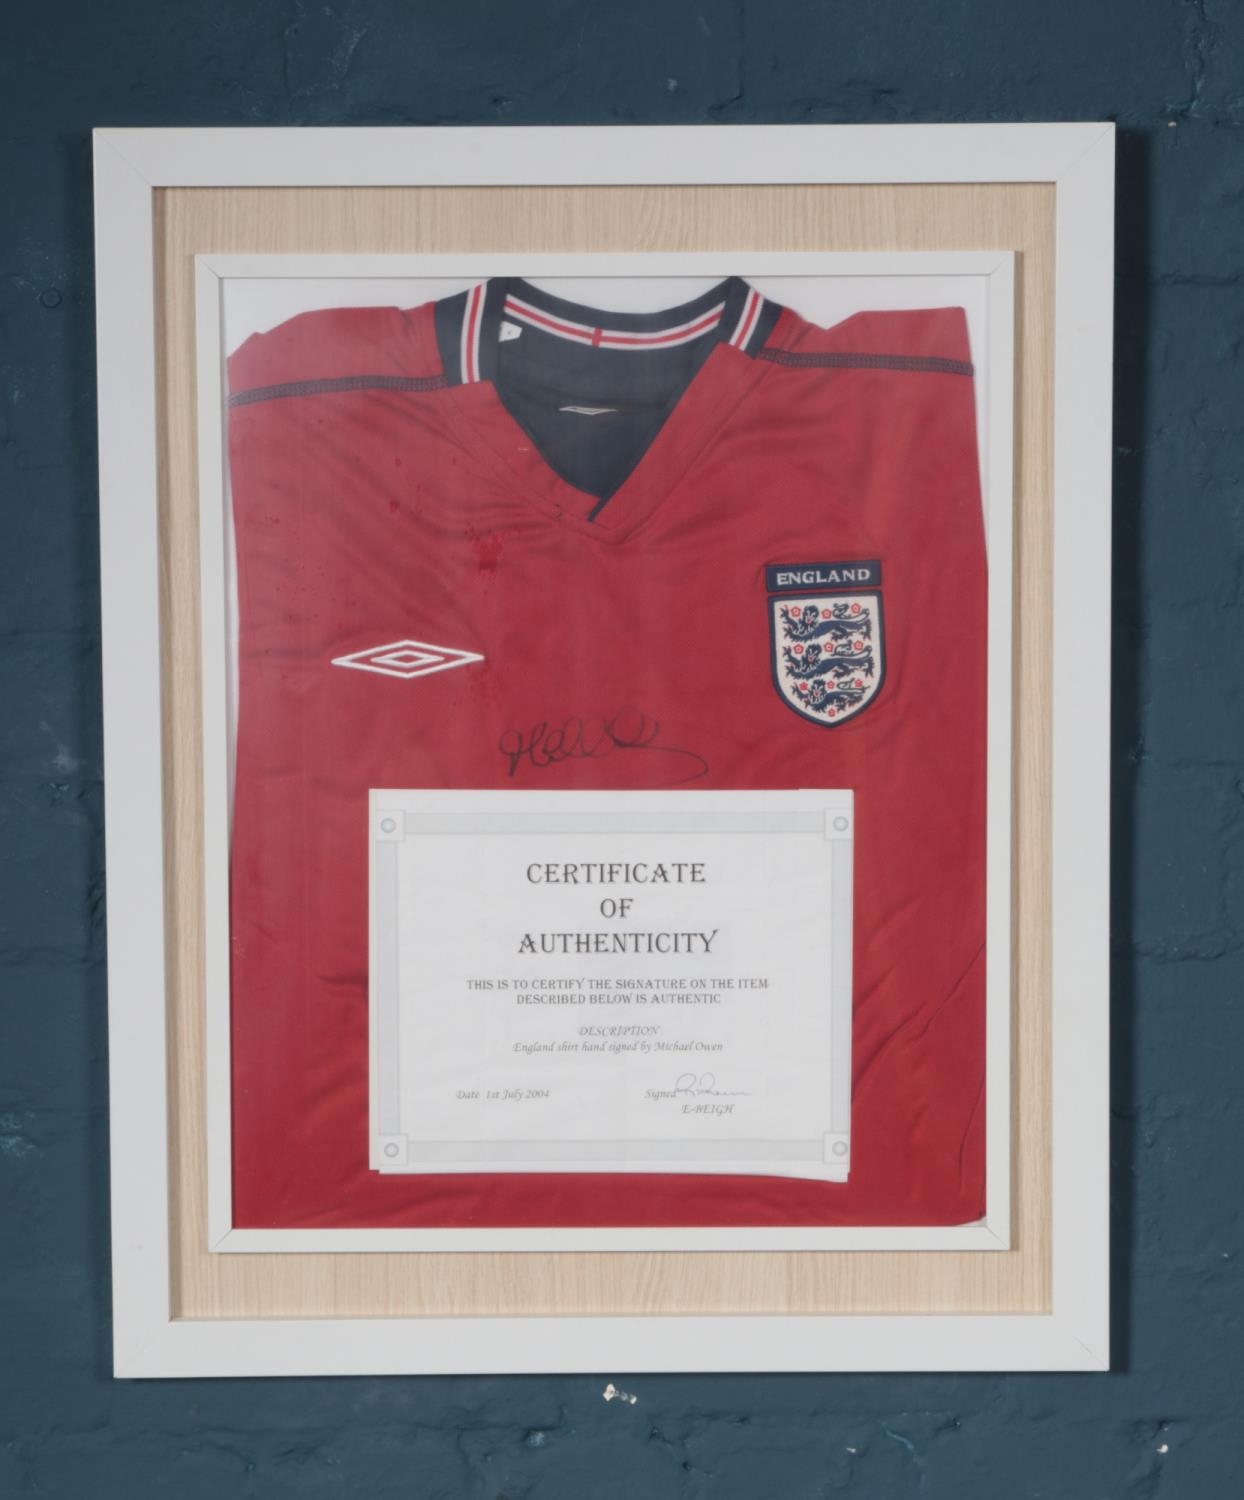 A framed England football shirt signed by Michael Owen with certificate of authentication